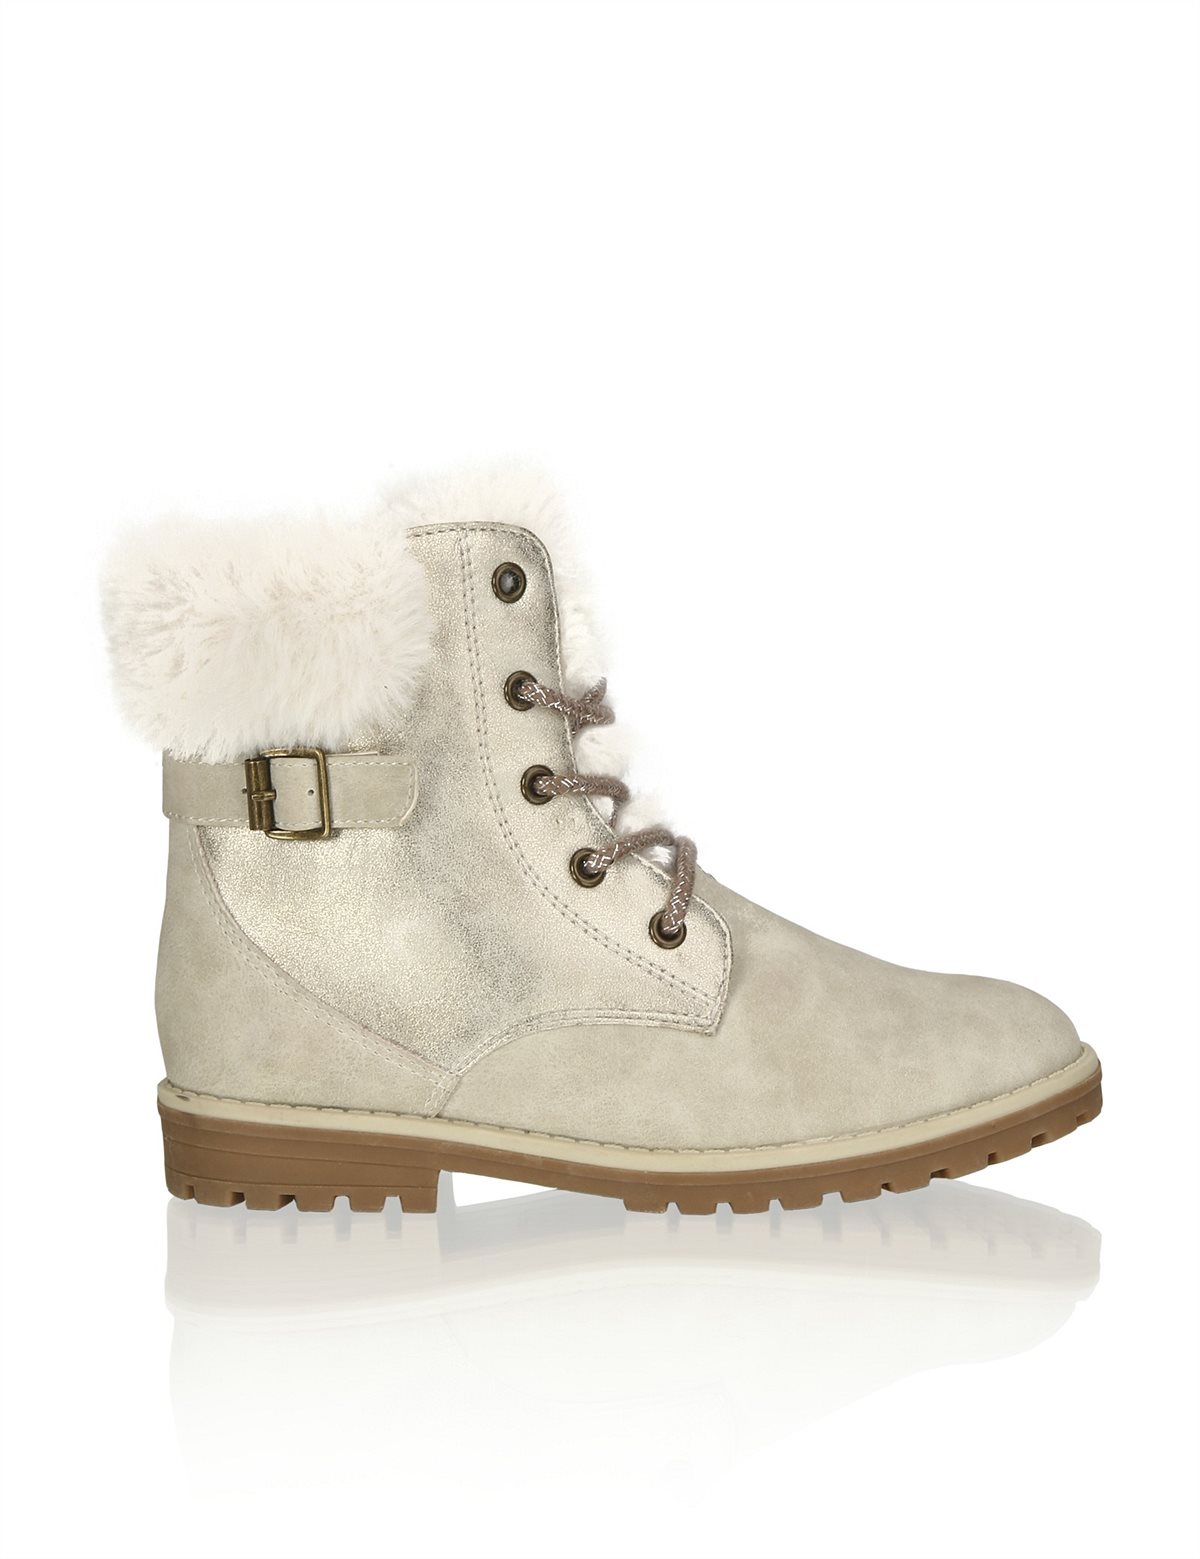 HUMANIC 14 Funky Girls Boots mit Warmfutter EUR 39,95 ab Mitte August 3623504725